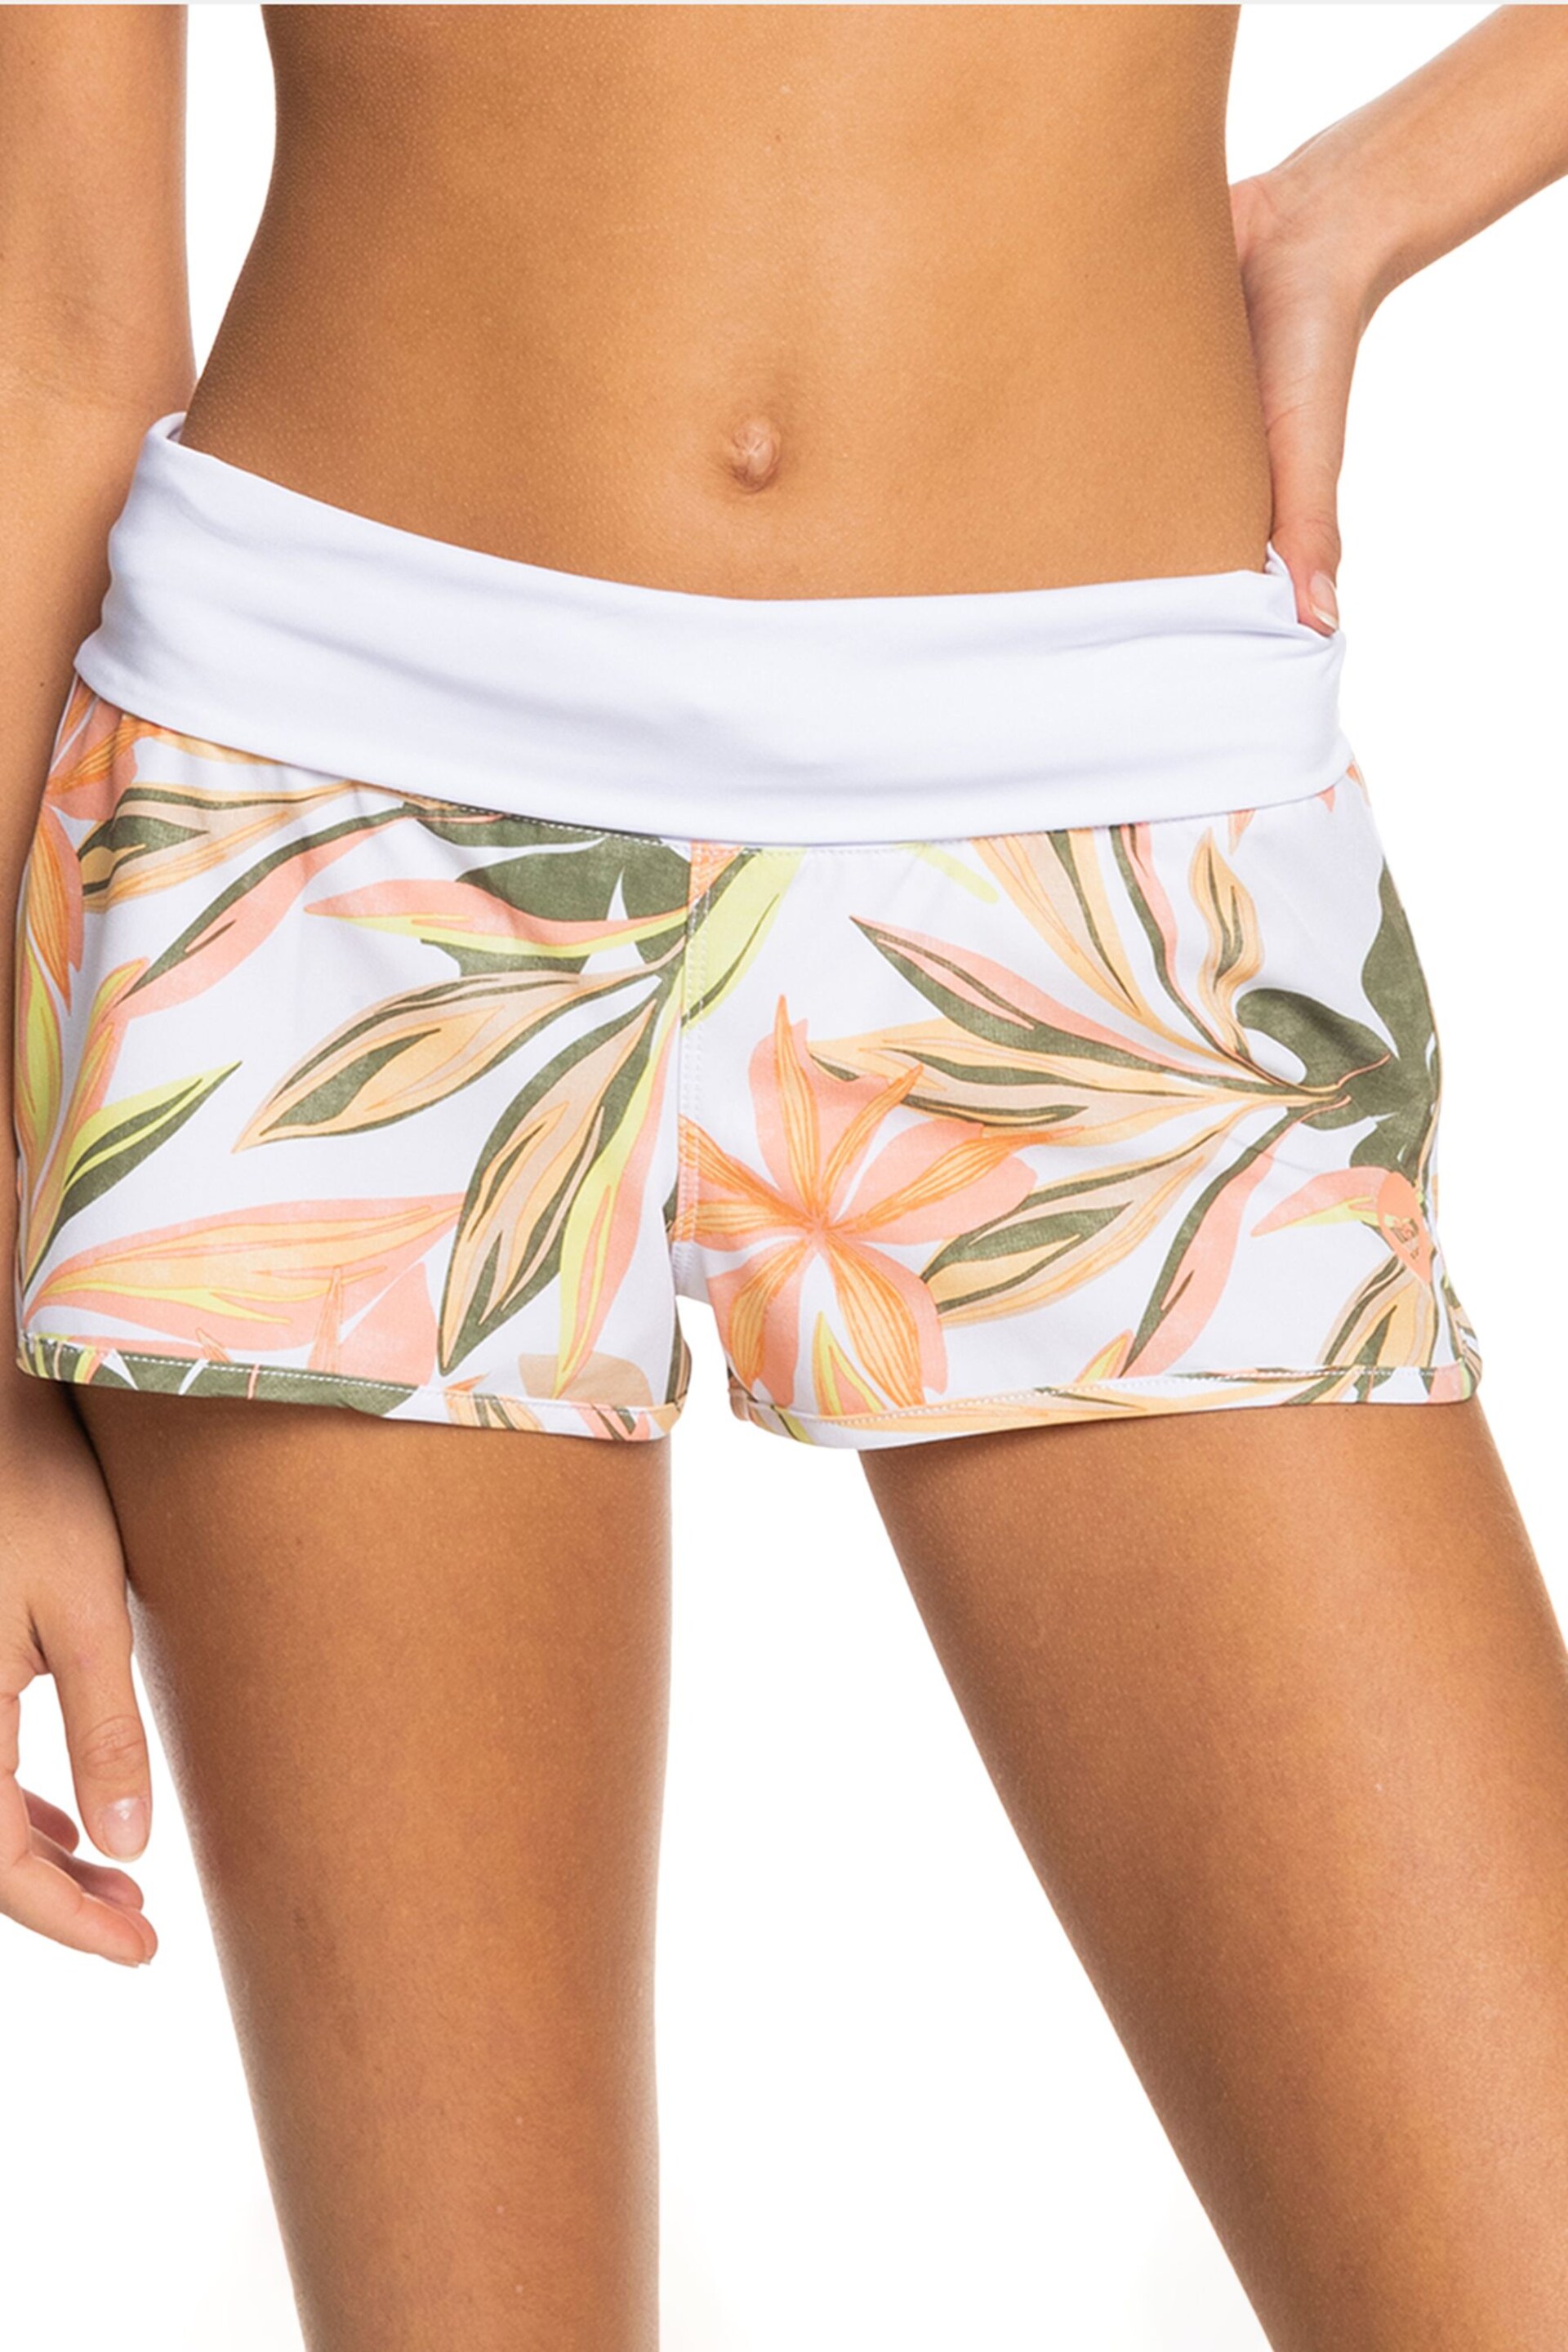 Roxy White Floral Endless Summer Swim Board Shorts - Image 1 of 7